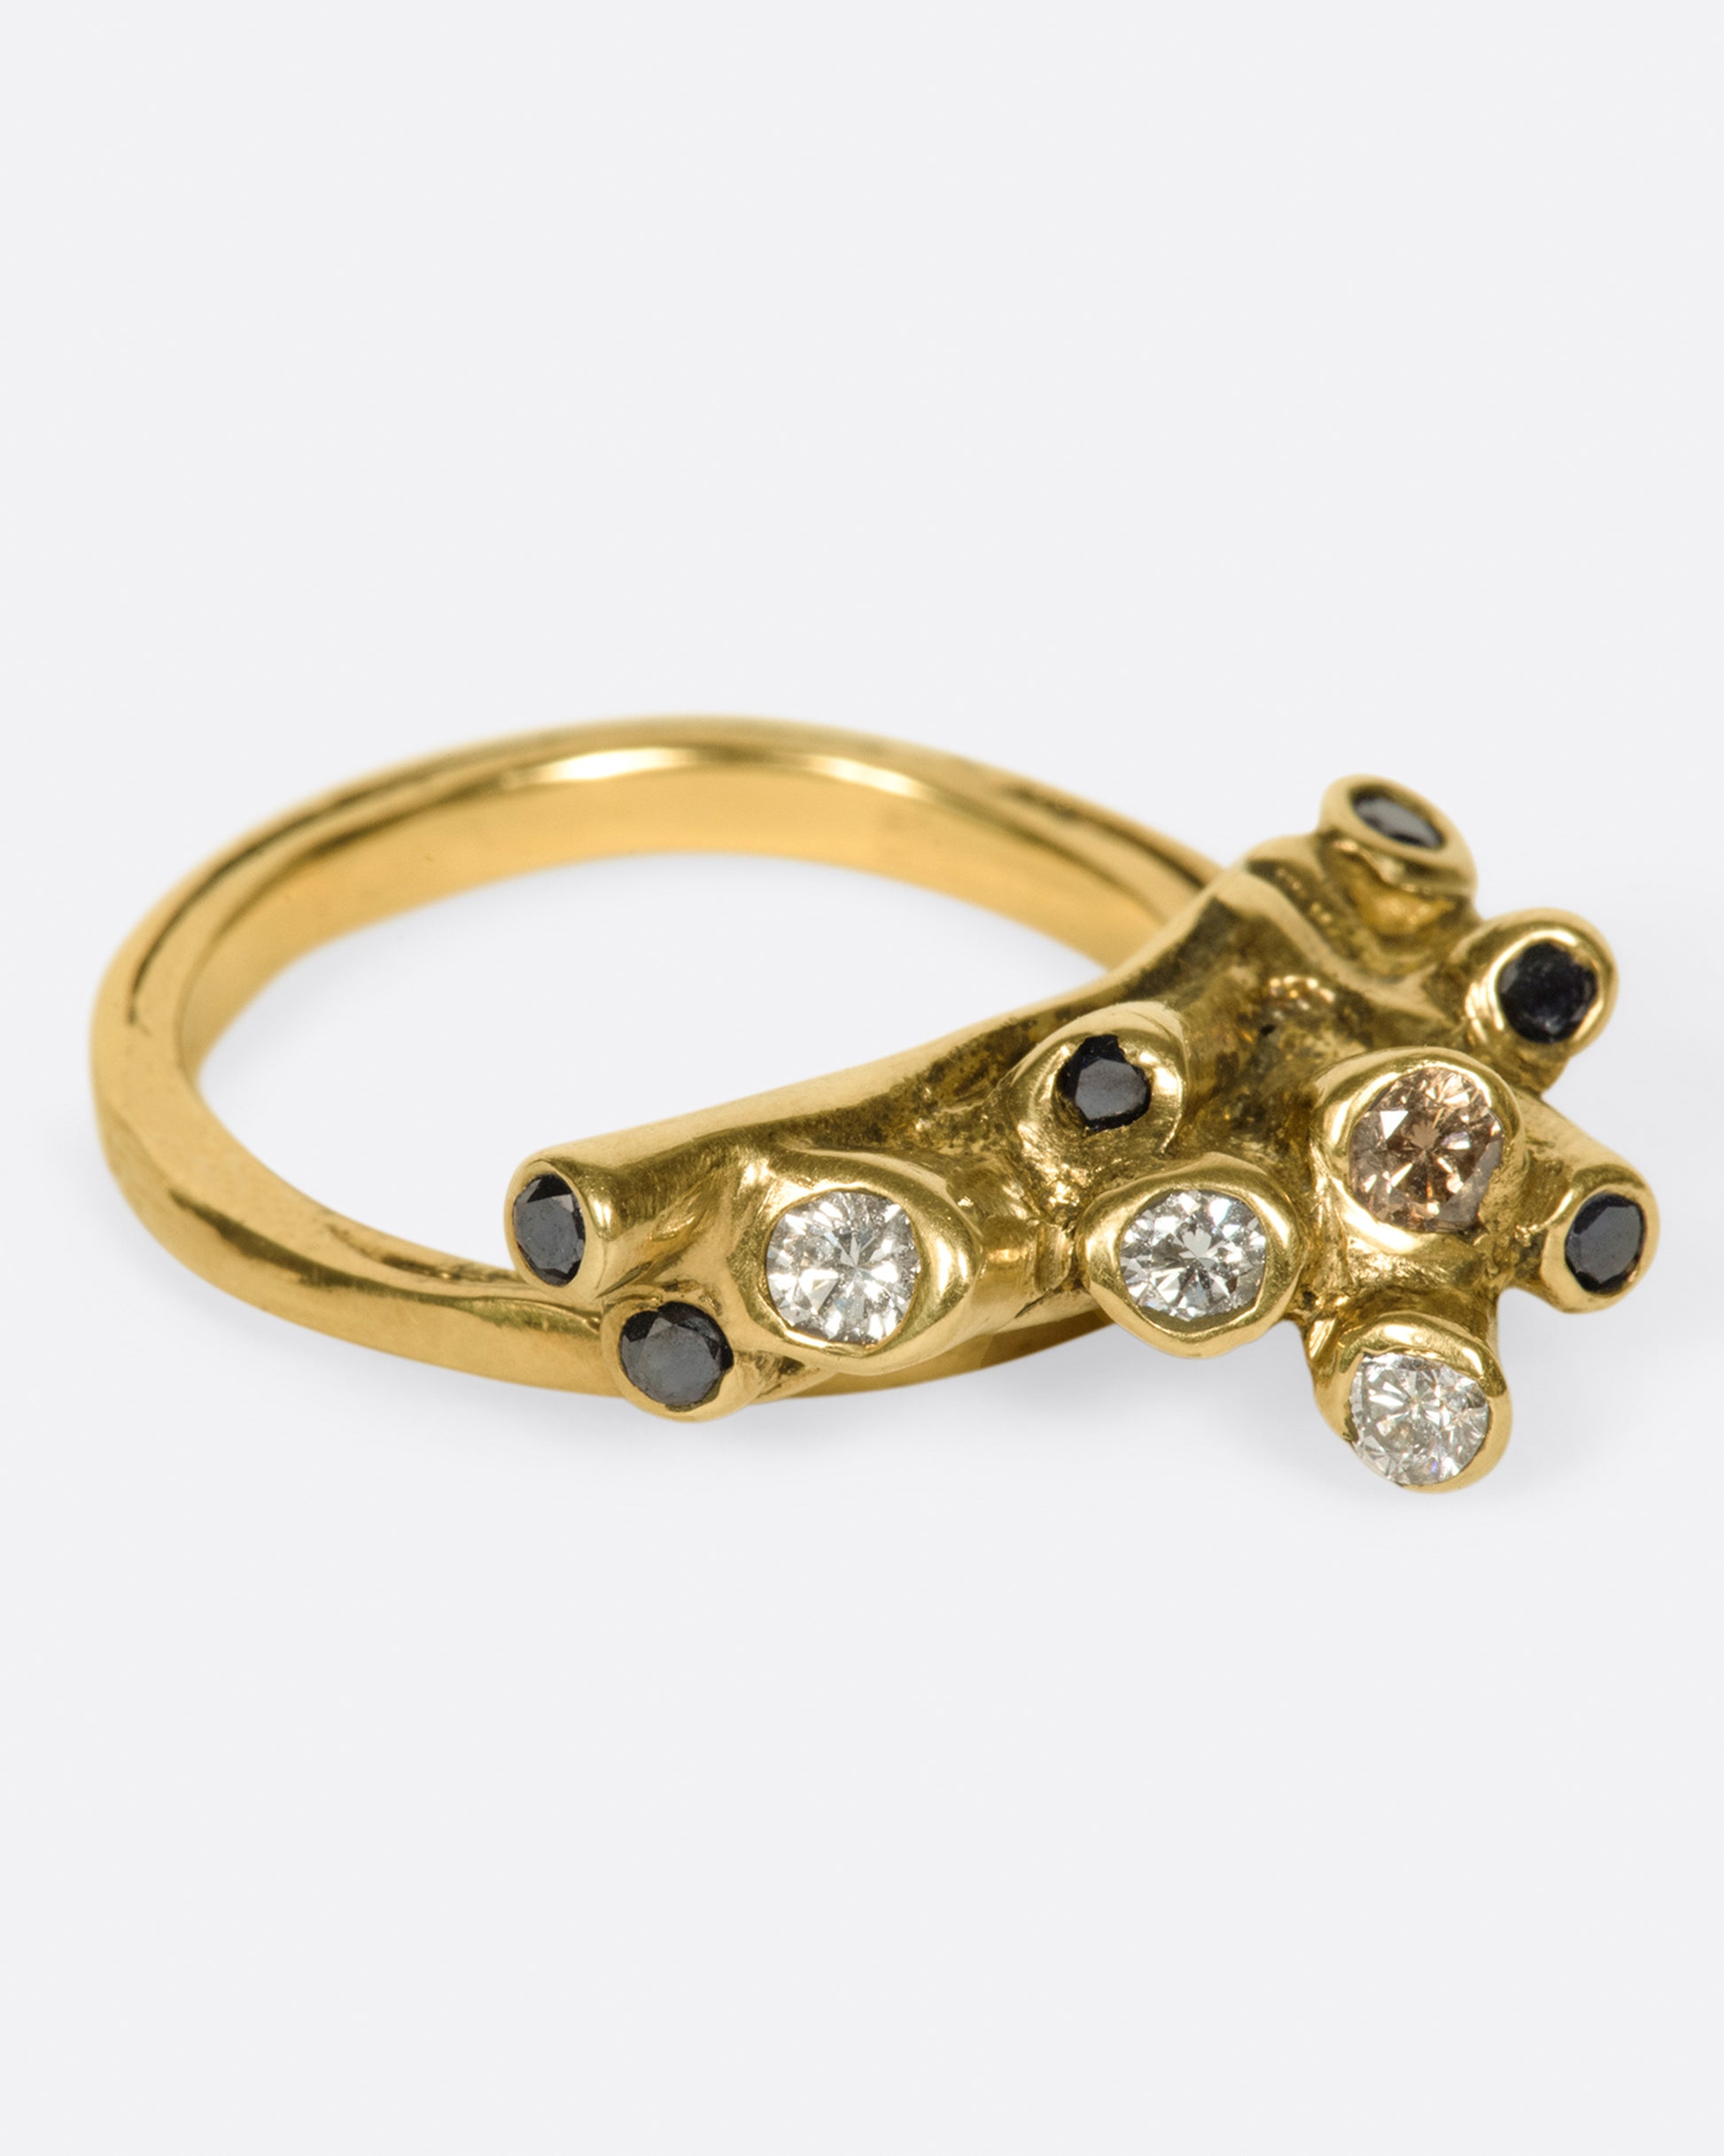 A ring with white, black, and cognac diamonds set in an anemone-like cluster.